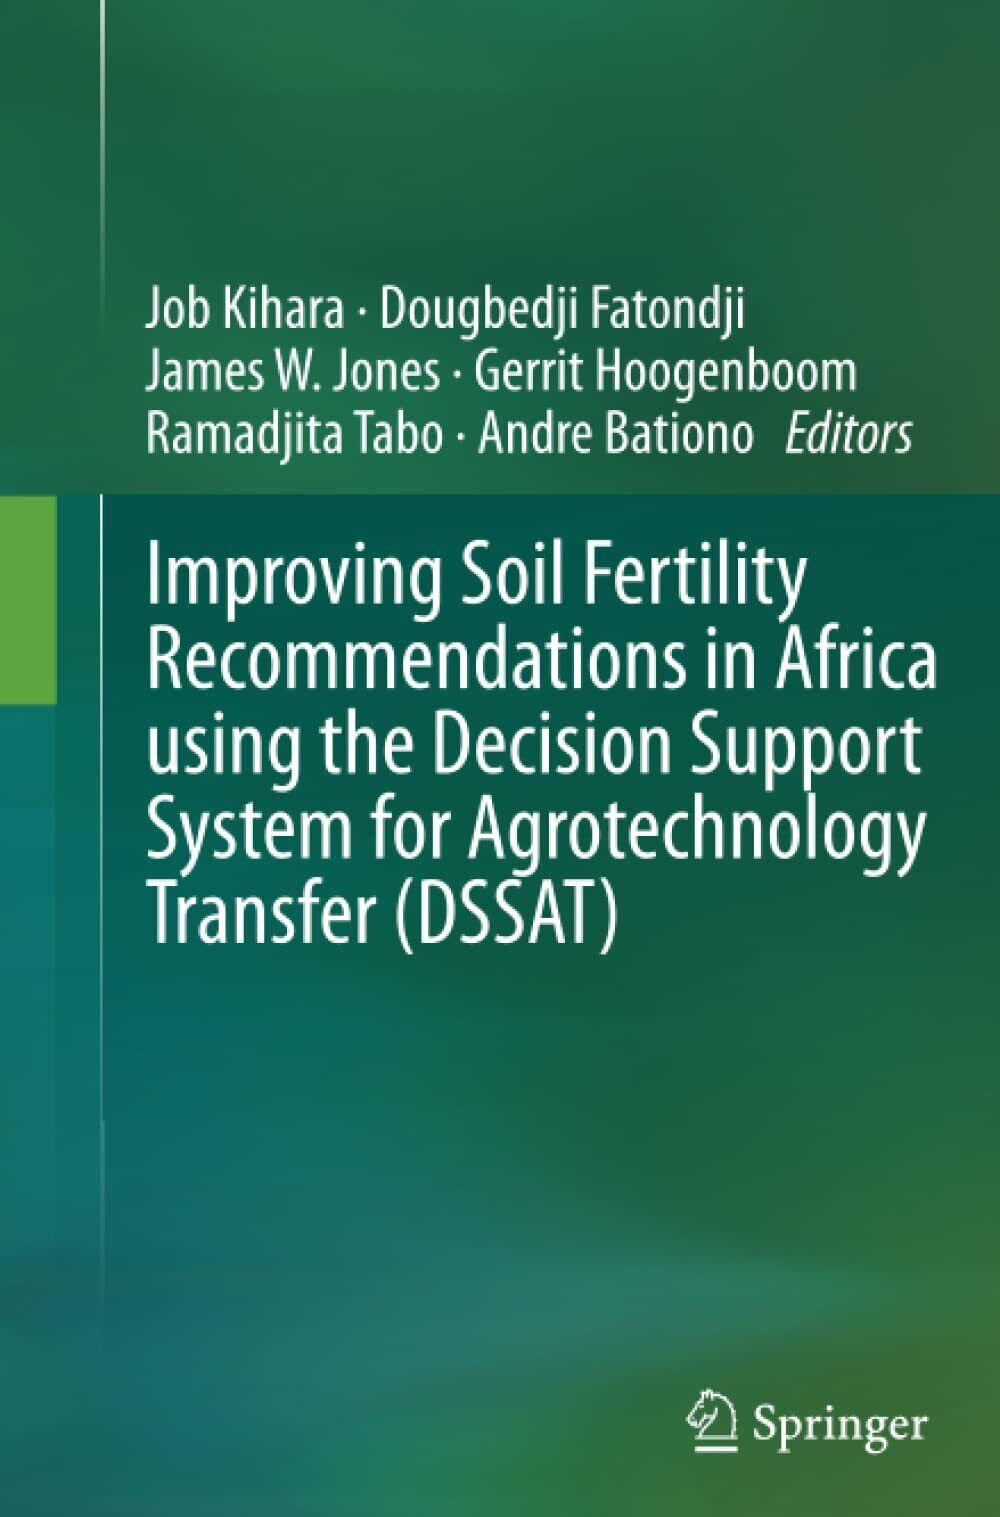 Improving Soil Fertility Recommendations in Africa using the Decision Support